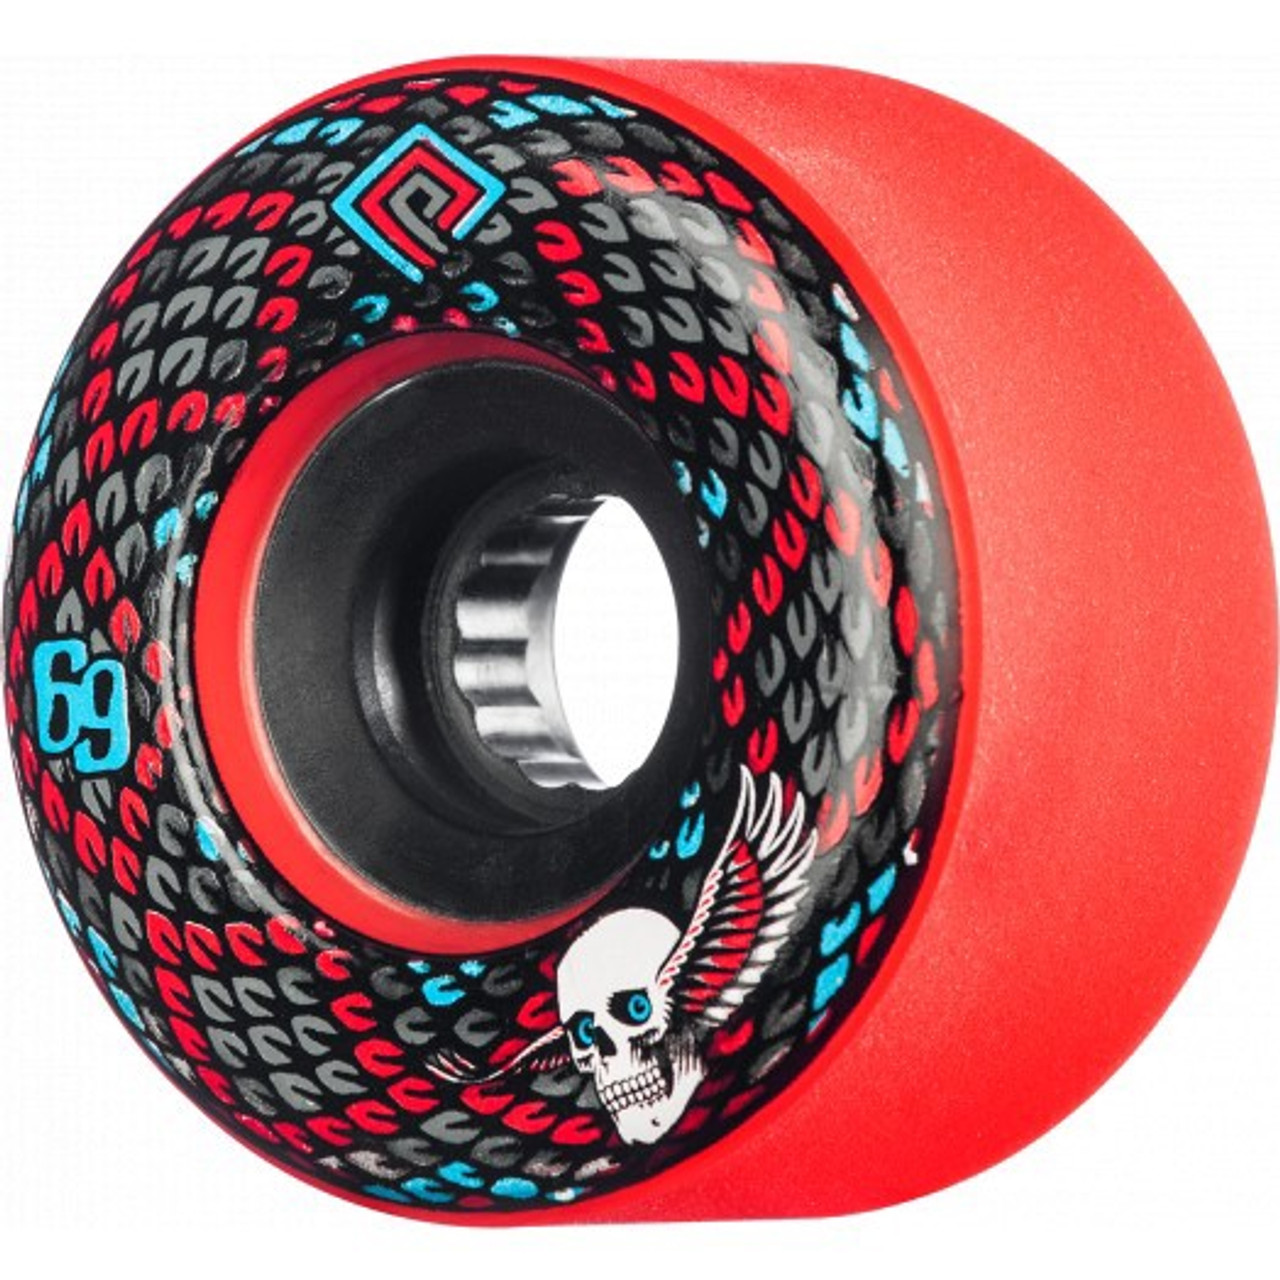 POWELL PERALTA SNAKES WHEELS 69mm/75A - RED